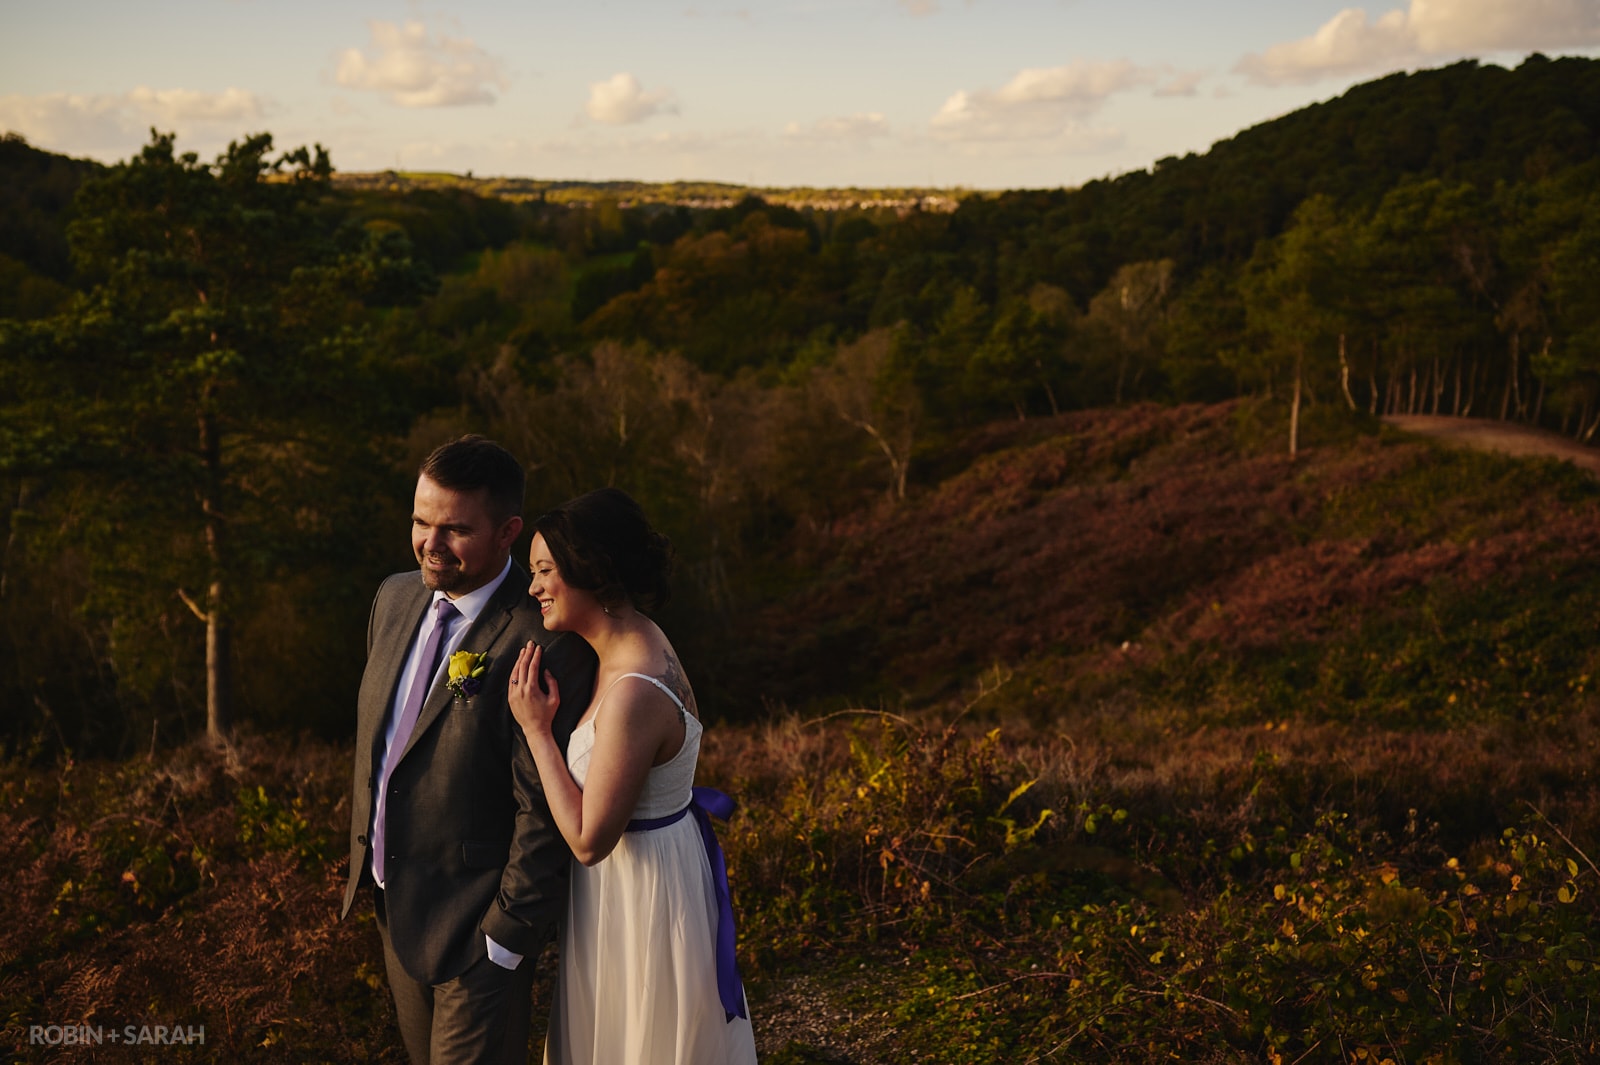 Bride and groom share a quiet moment standing together on top of a hill surrounded by lush woodlands in beautiful autumnal light